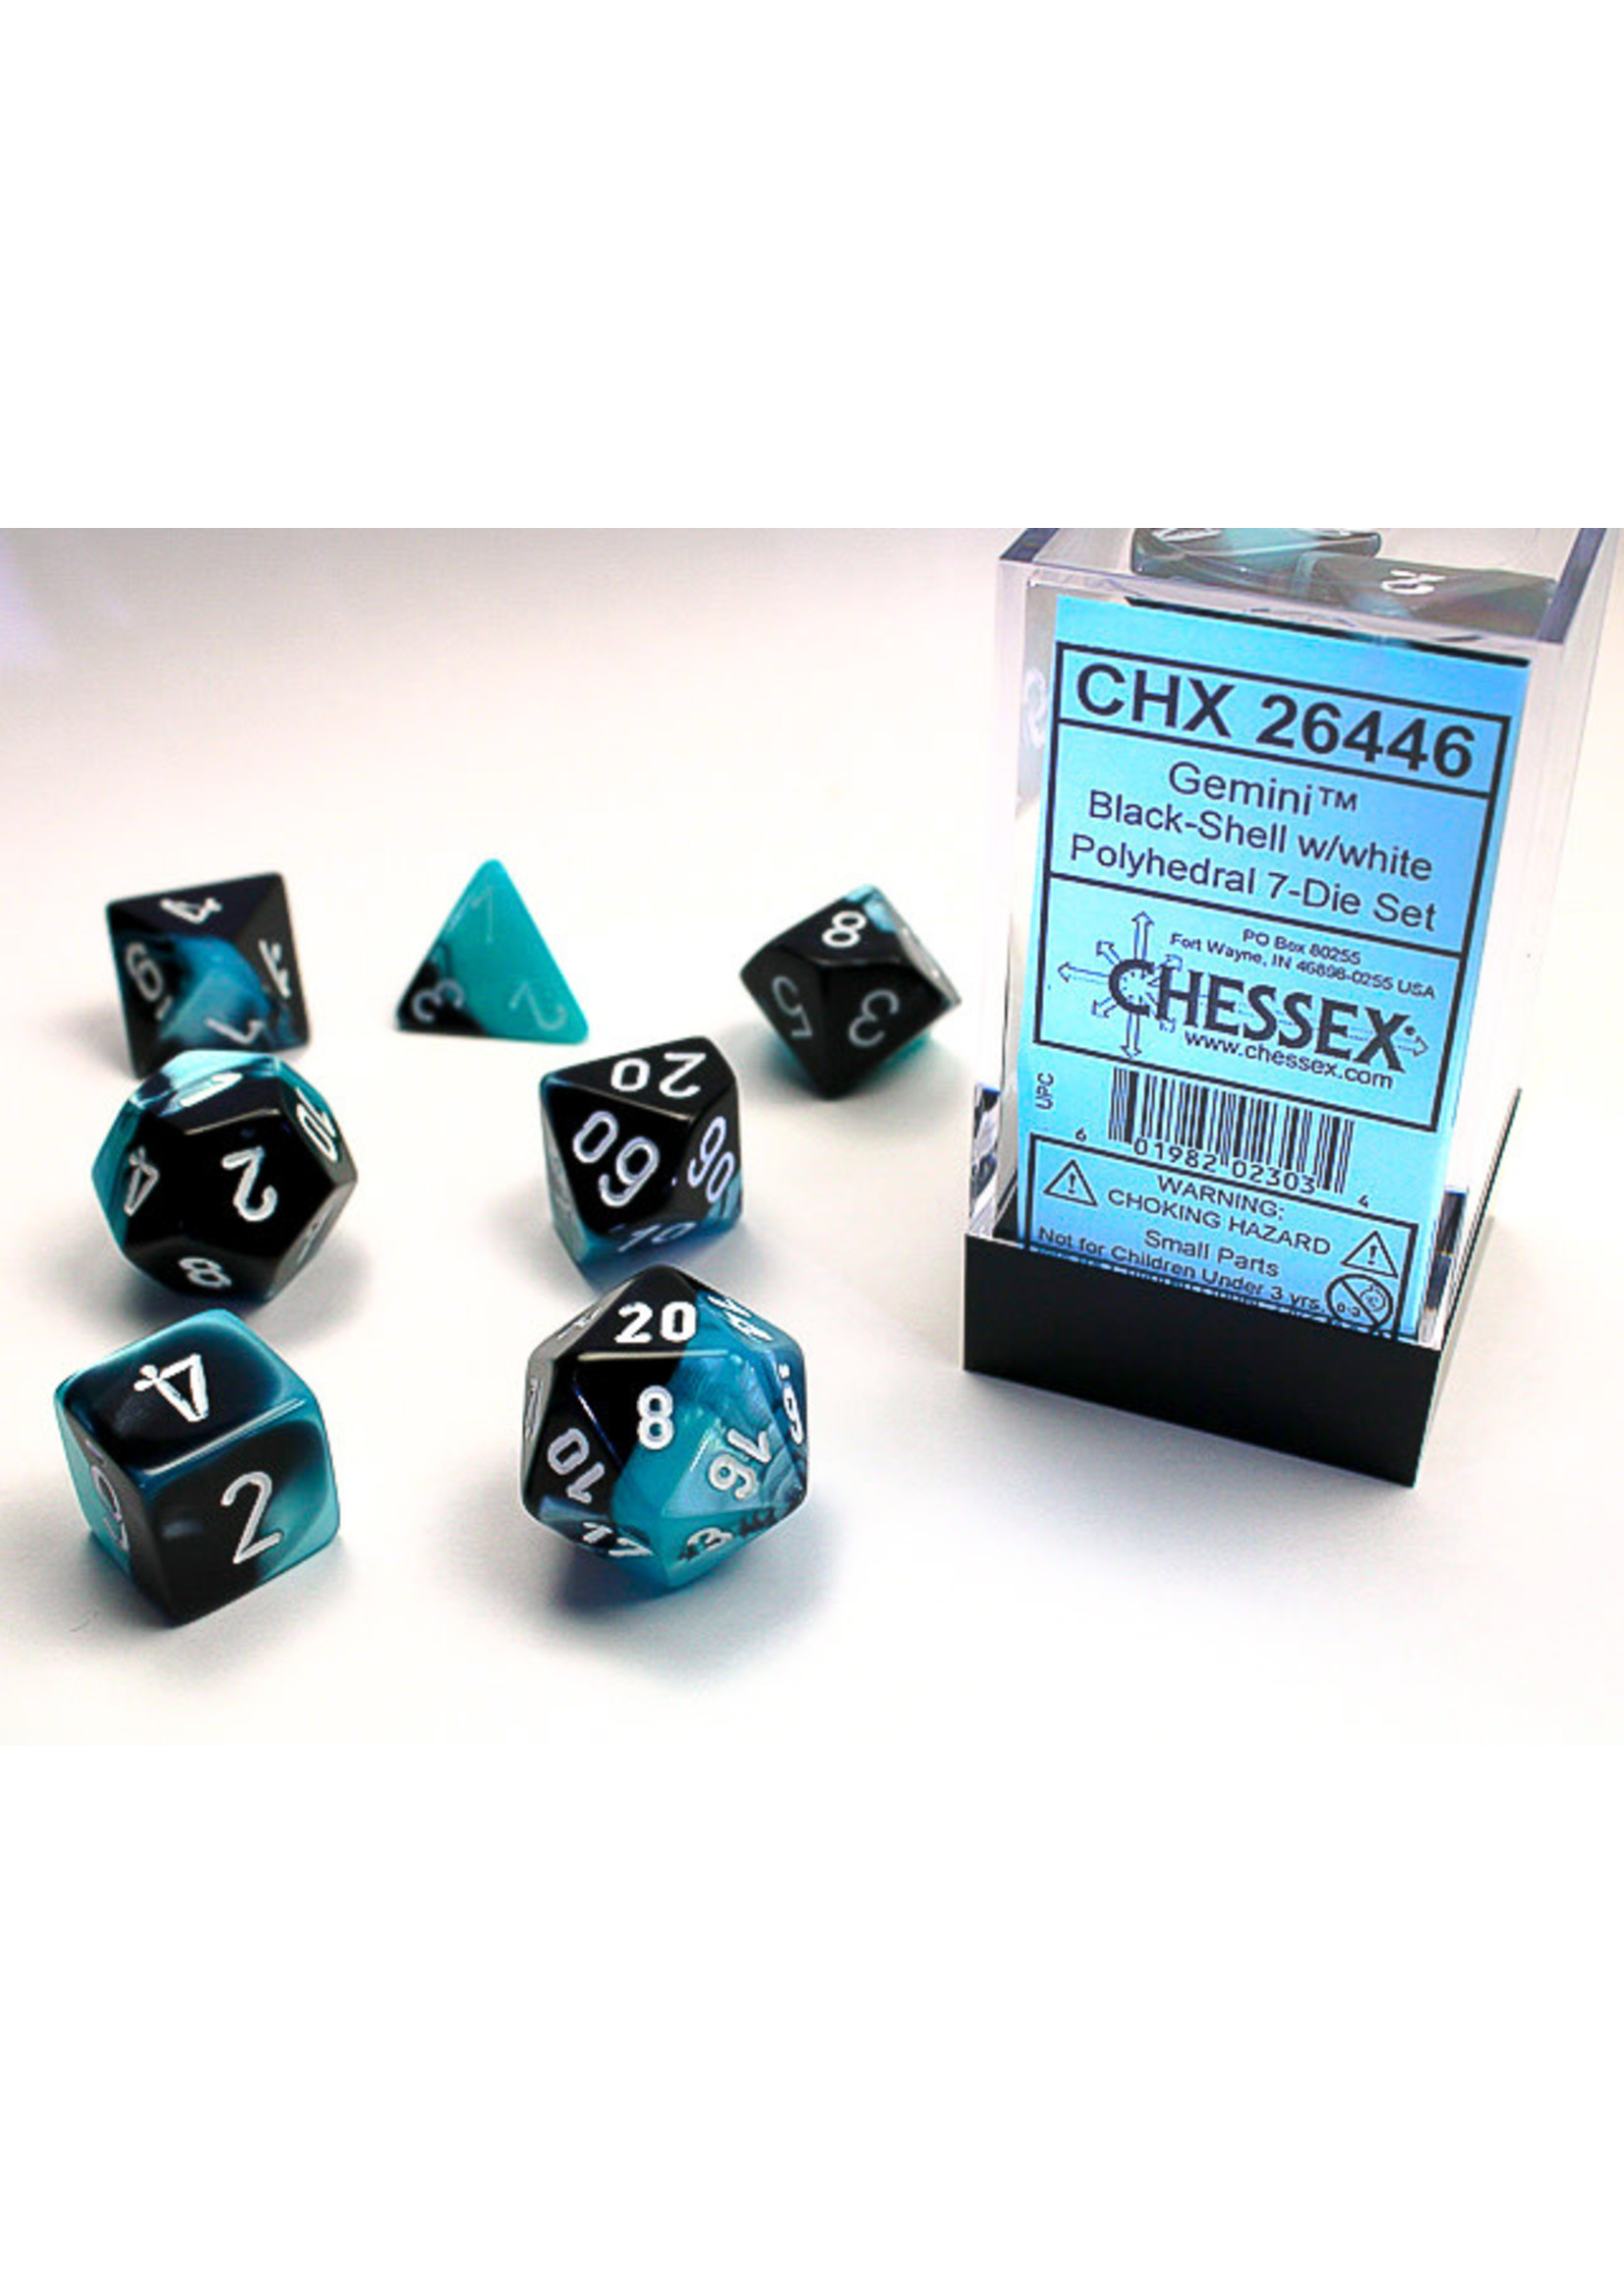 Chessex Gemini Black-Shell/white- Set of 7 Polyhedral Dice by Chessex